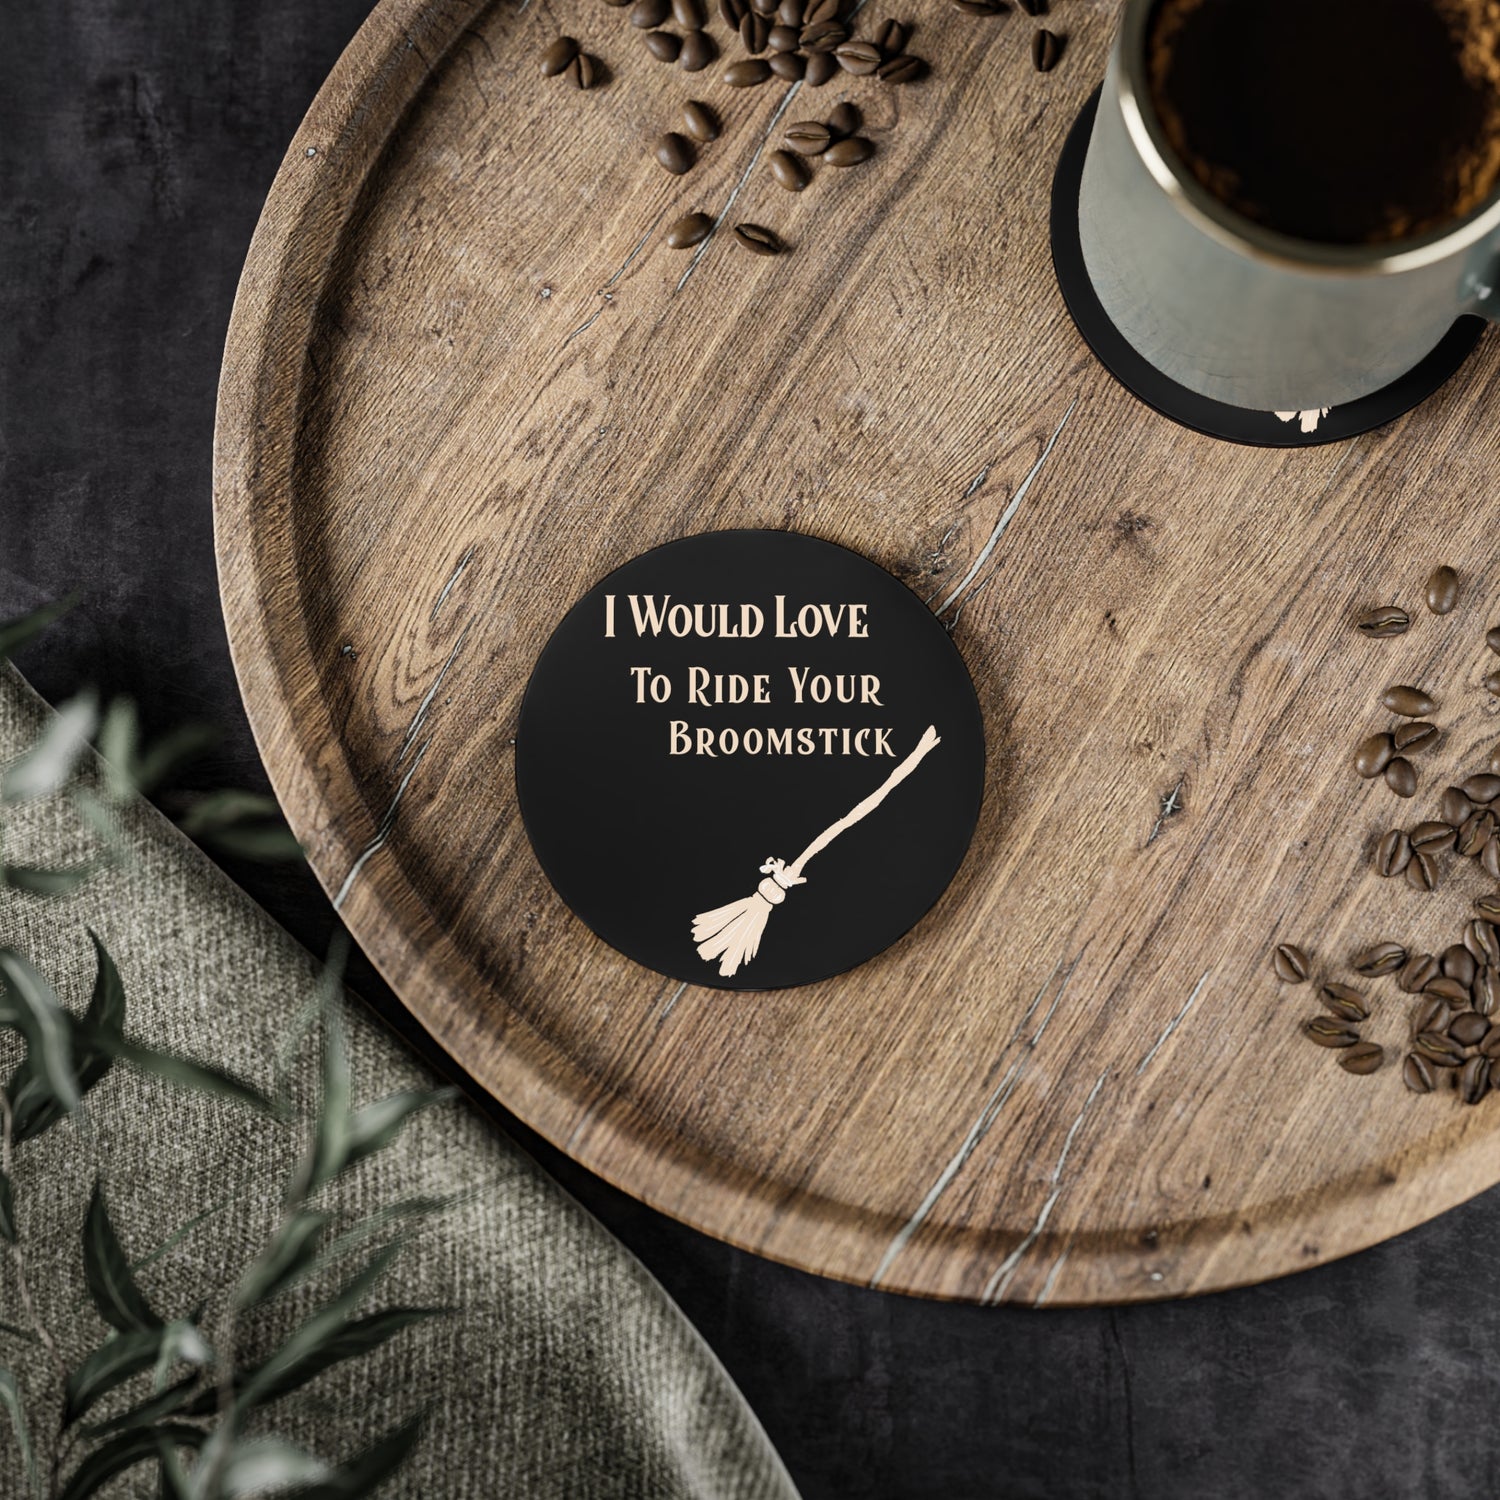 I'd Love to Ride Your Broomstick Coasters - Witchy Kitchens